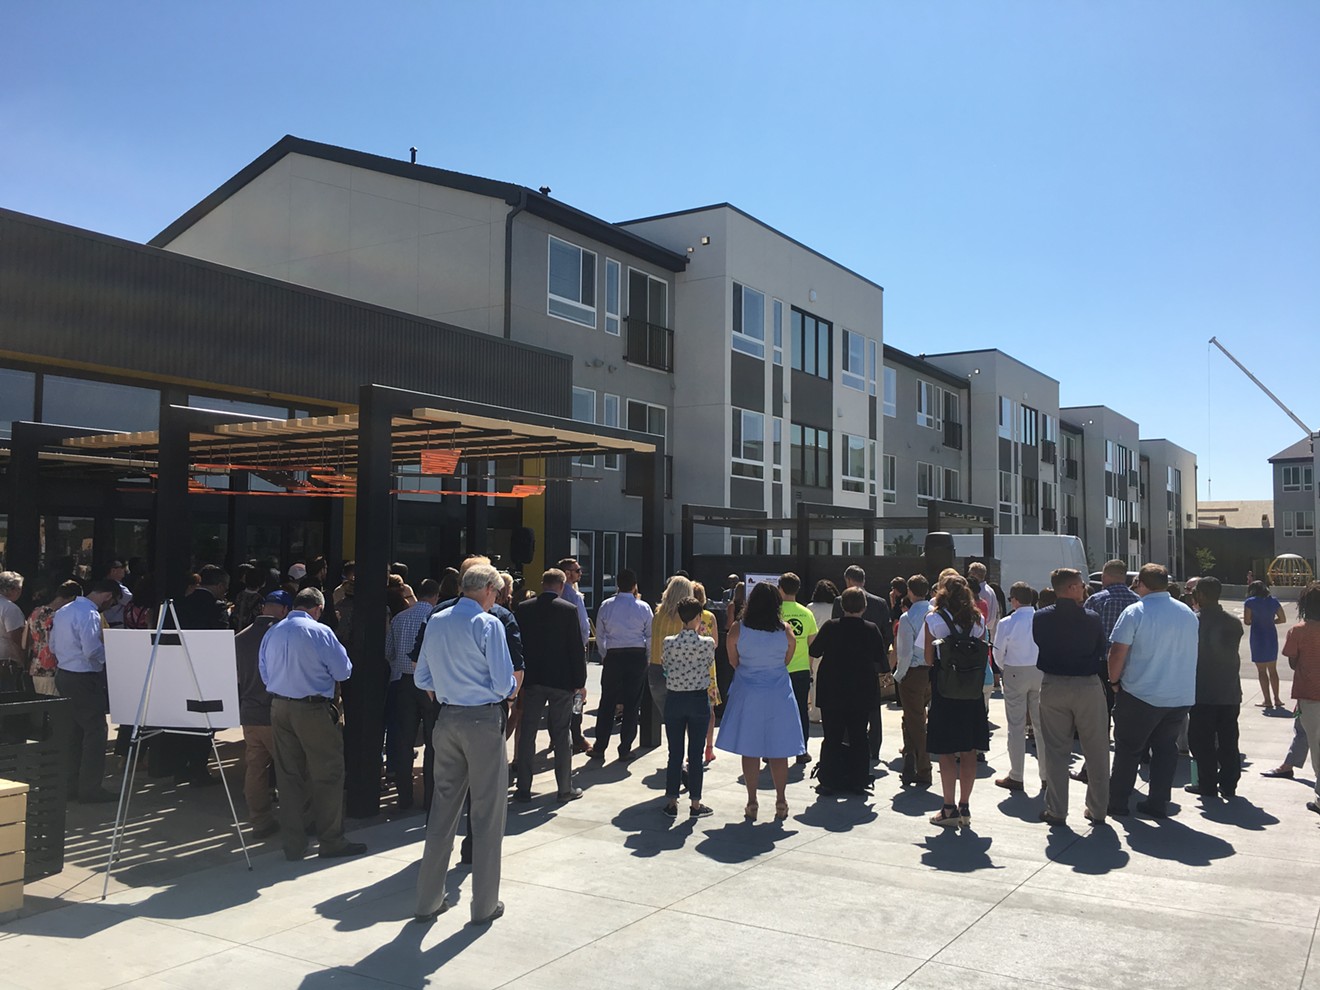 Crowds gathering to see the brand-new Moline Apartments, an affordable-housing complex in Stapleton.